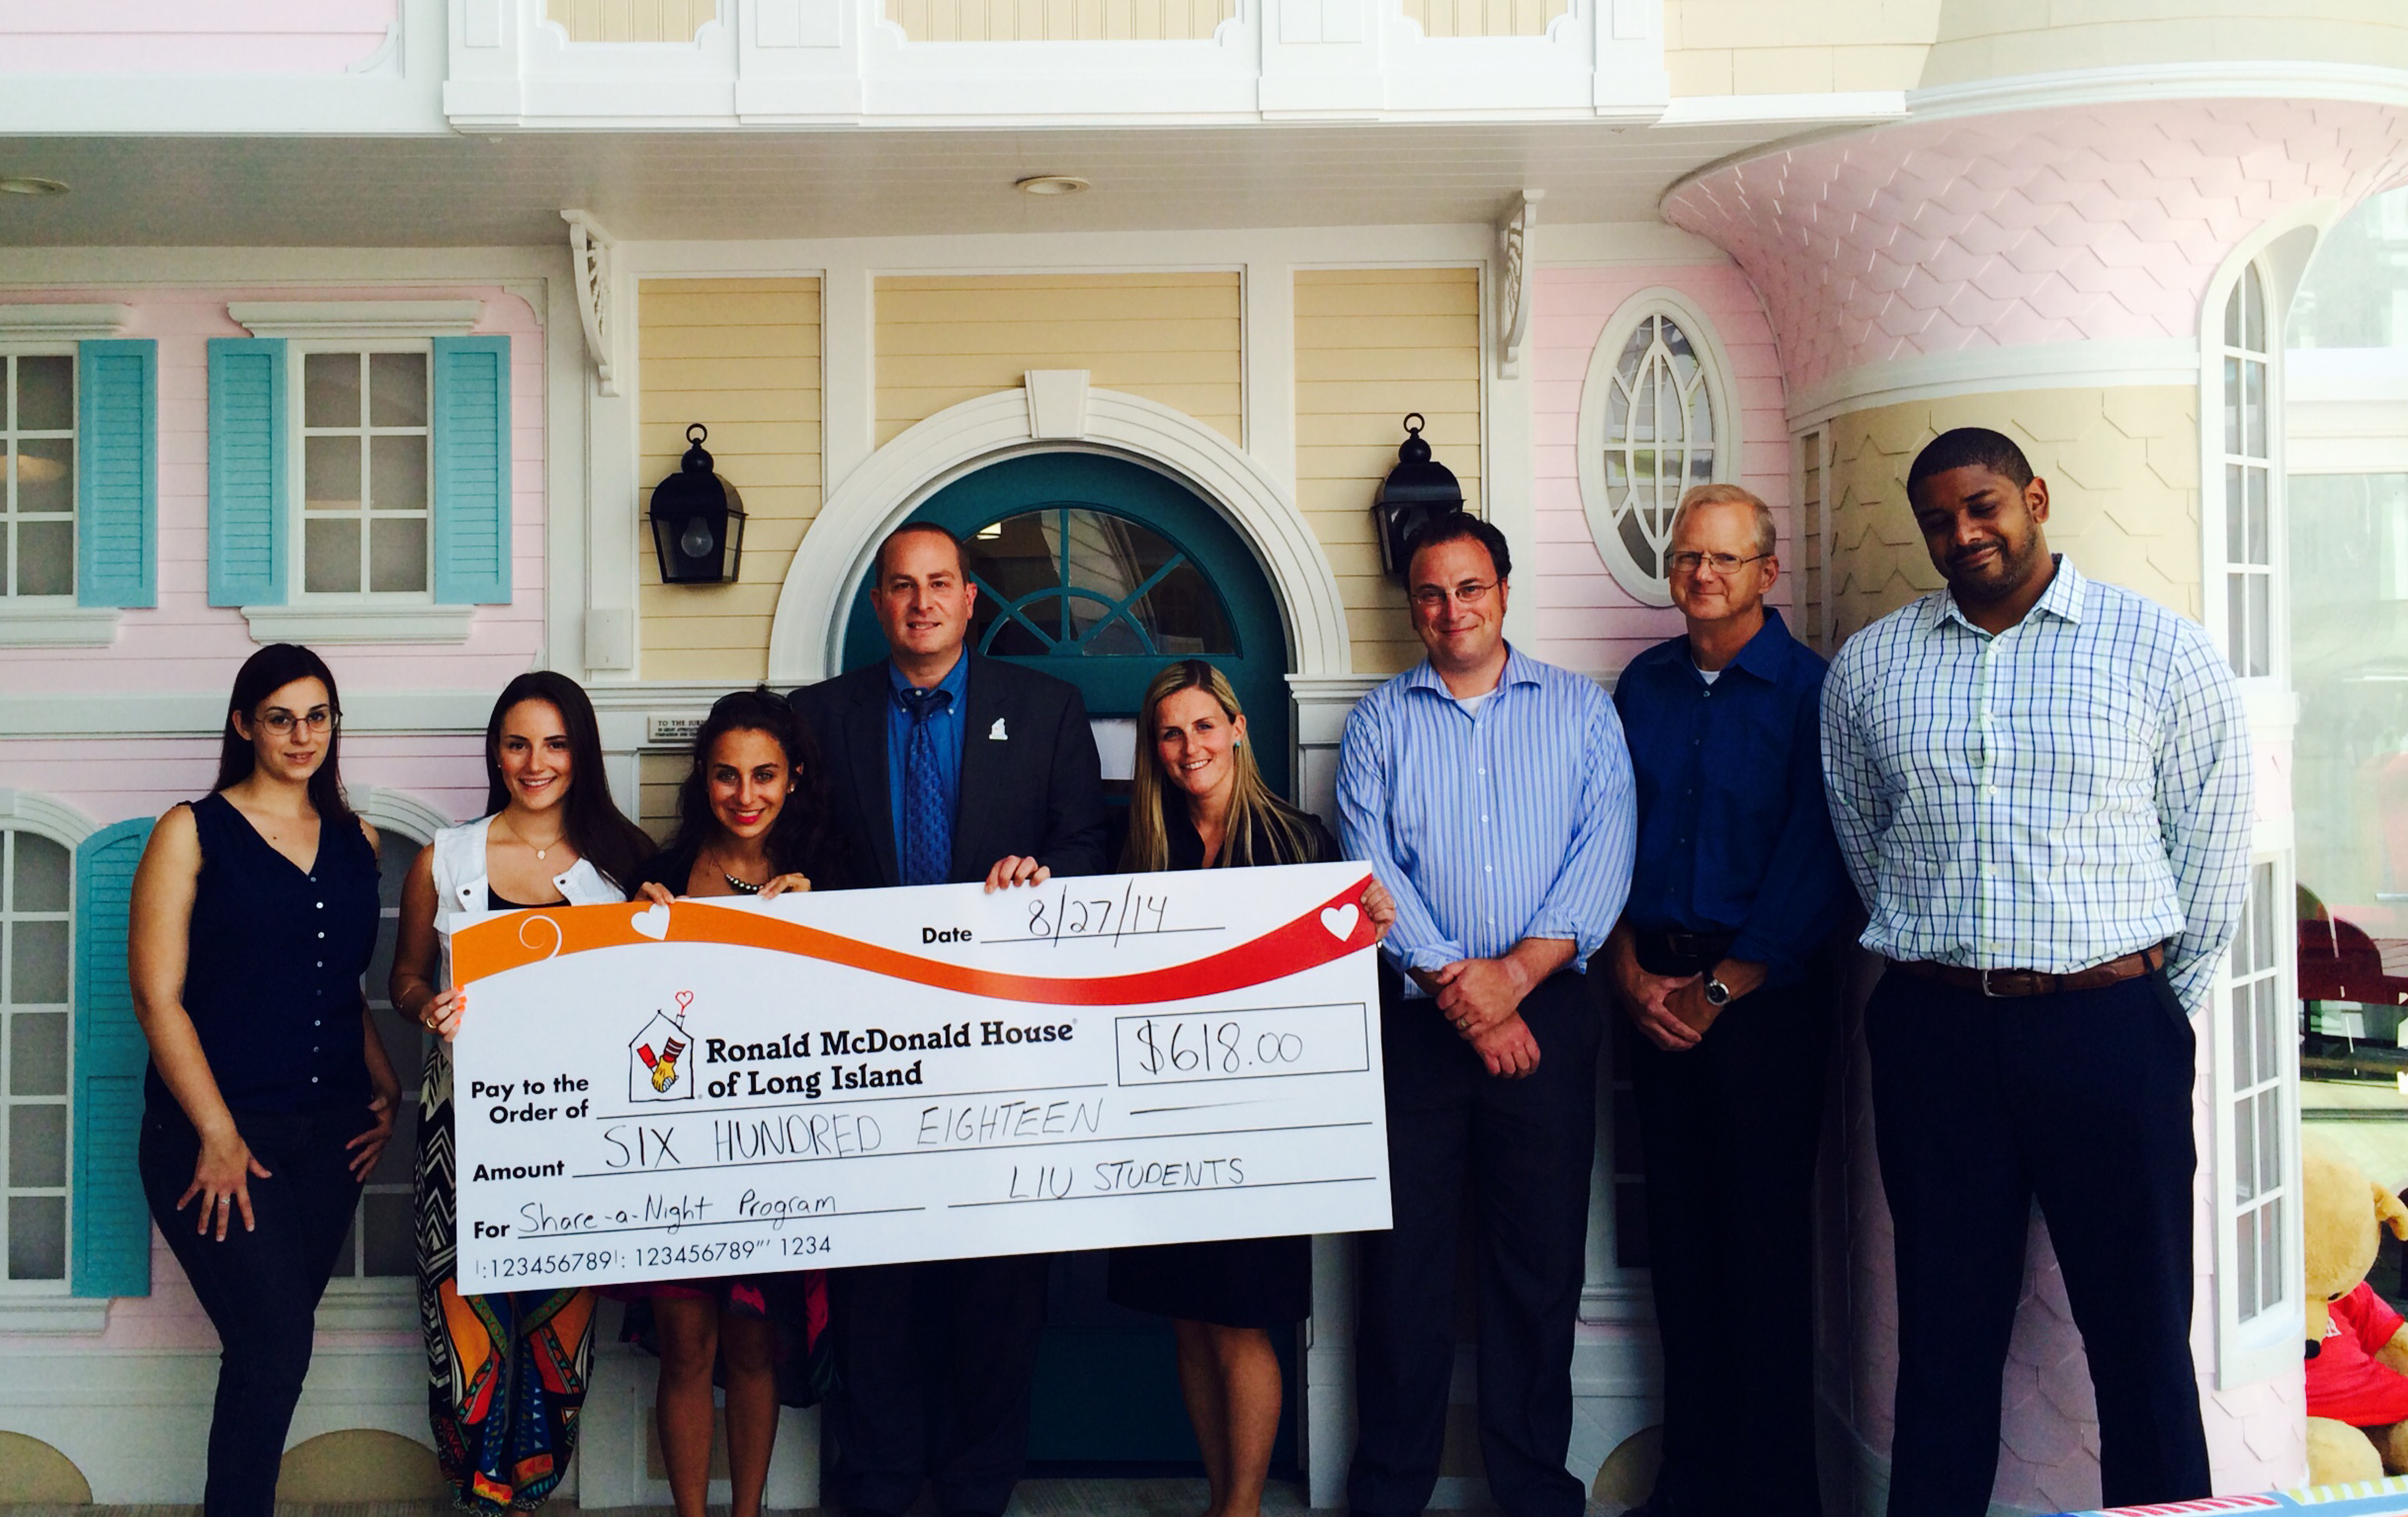 LIU Professor Jalajas, his students and Crowdster present the check to Ronald McDonald's House of Long Island